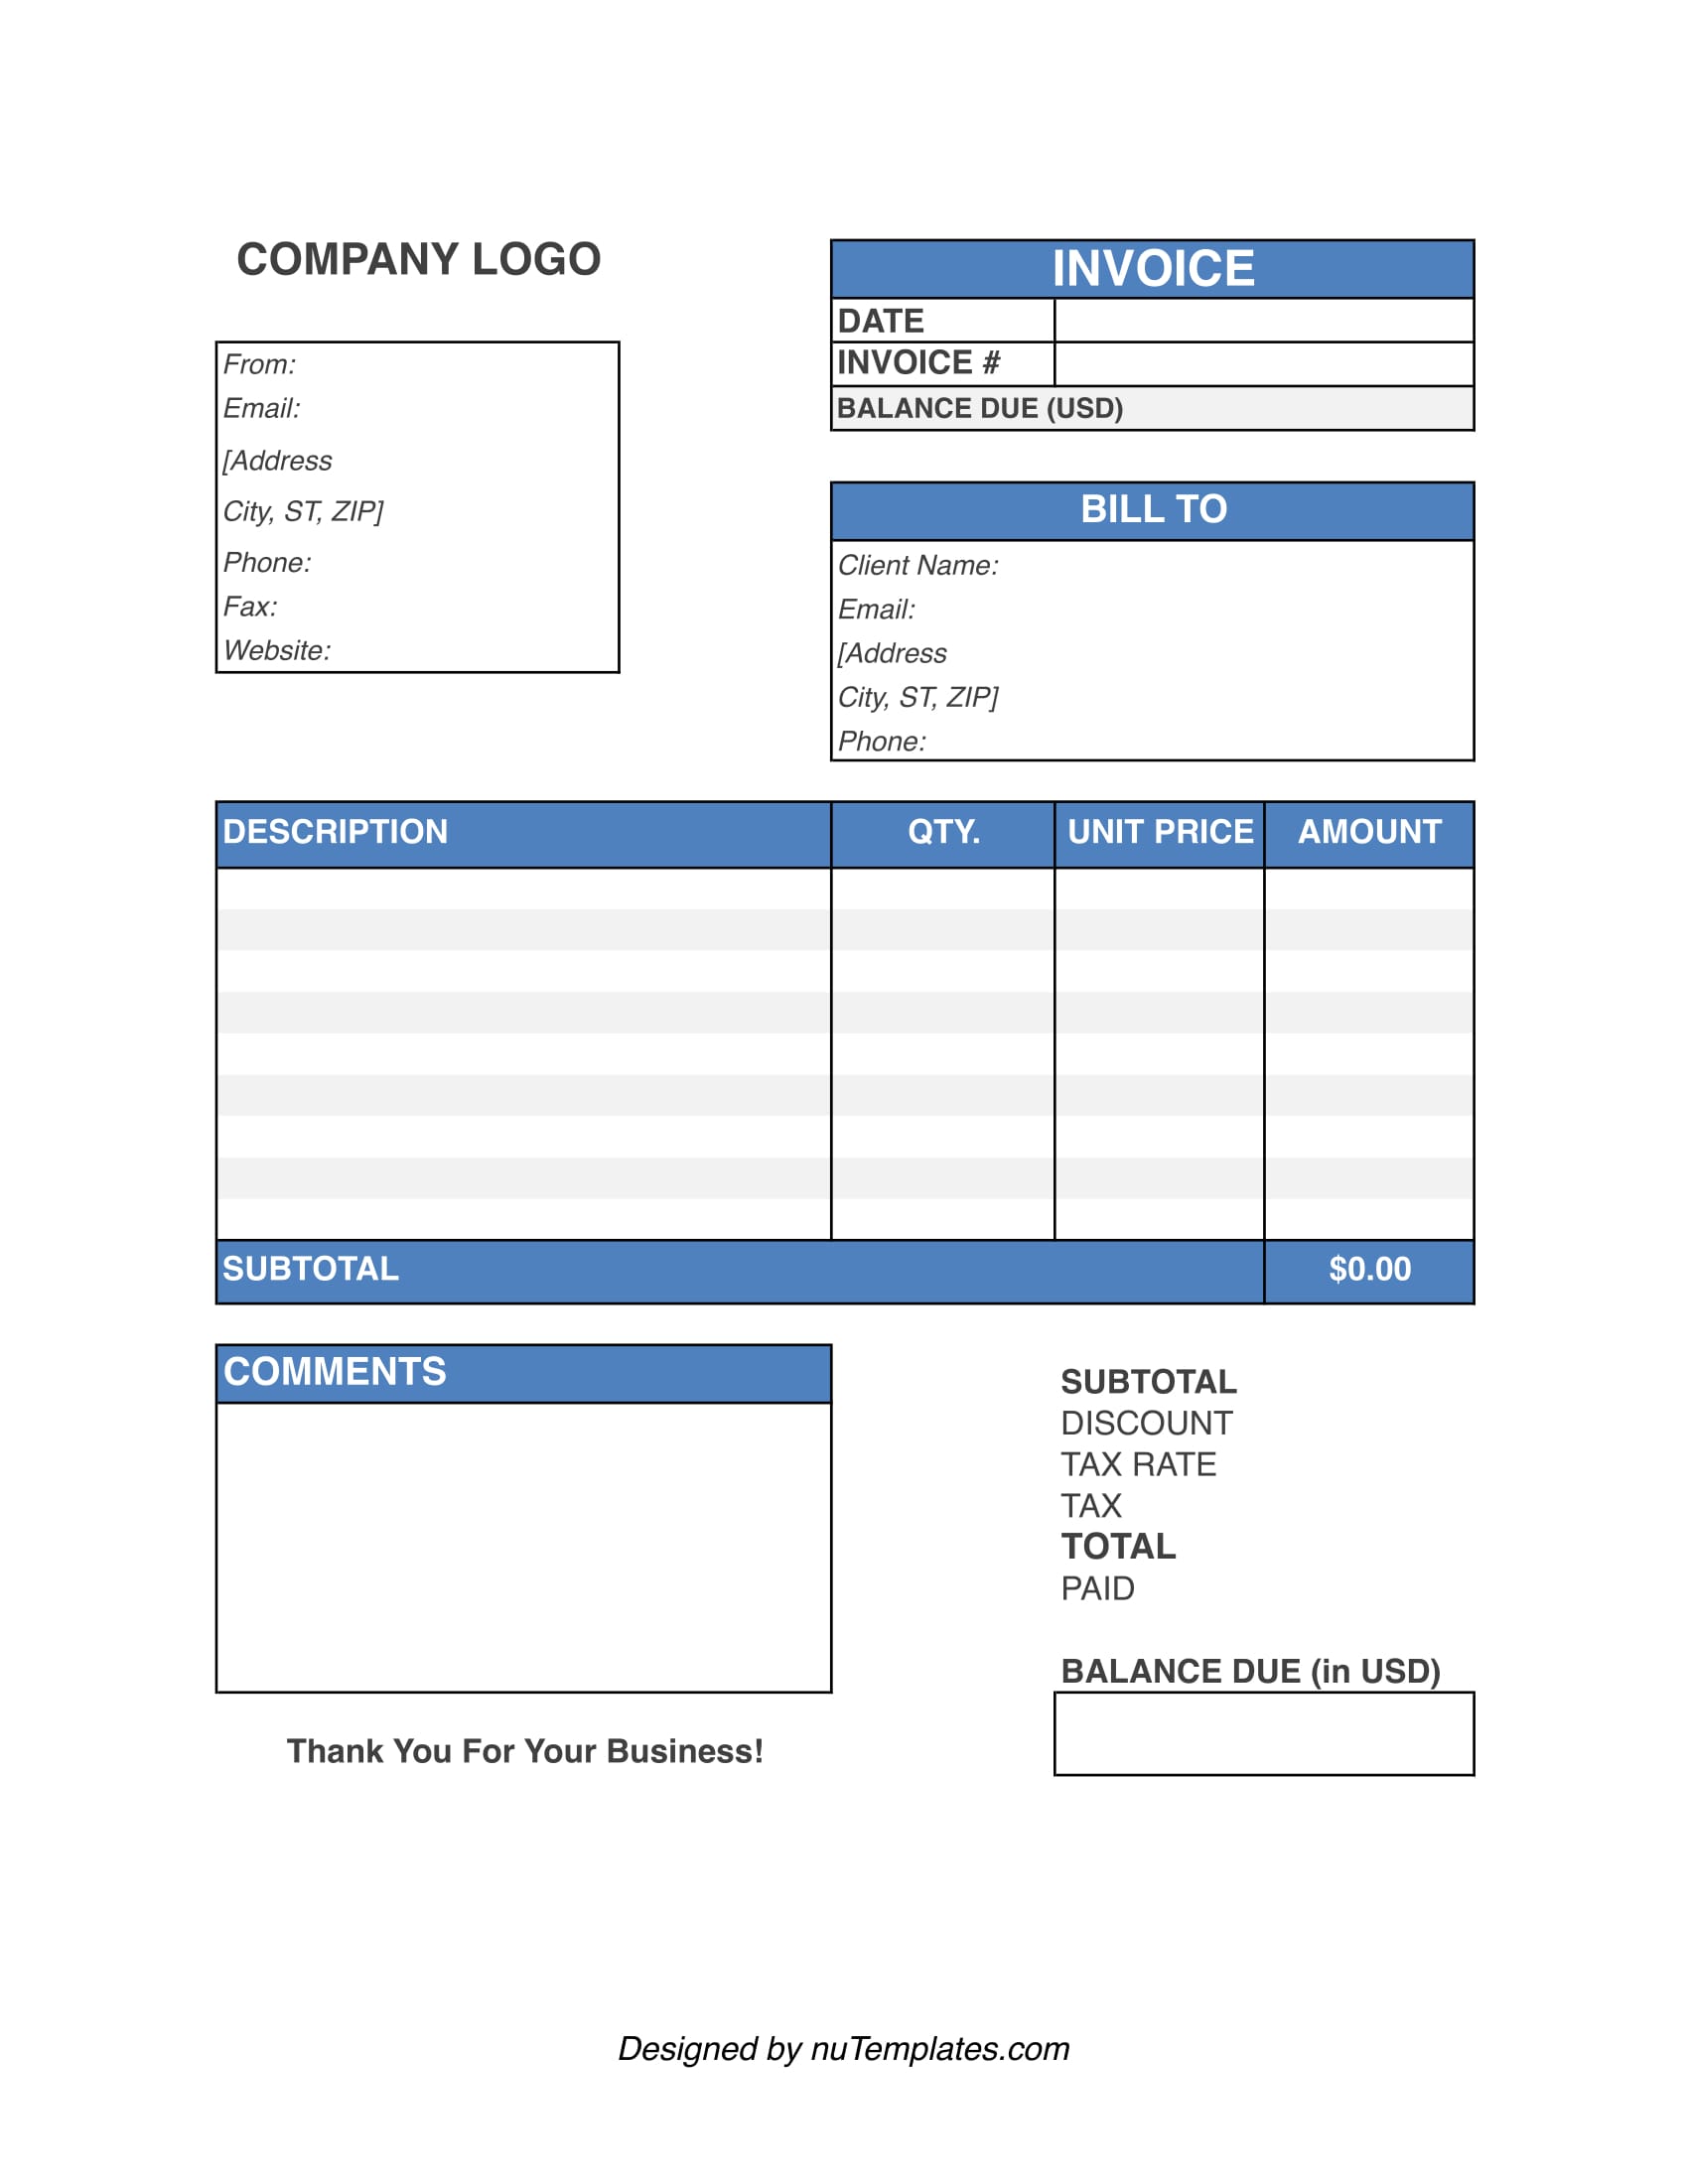 cleaning-invoice-template-cleaning-invoices-nutemplates